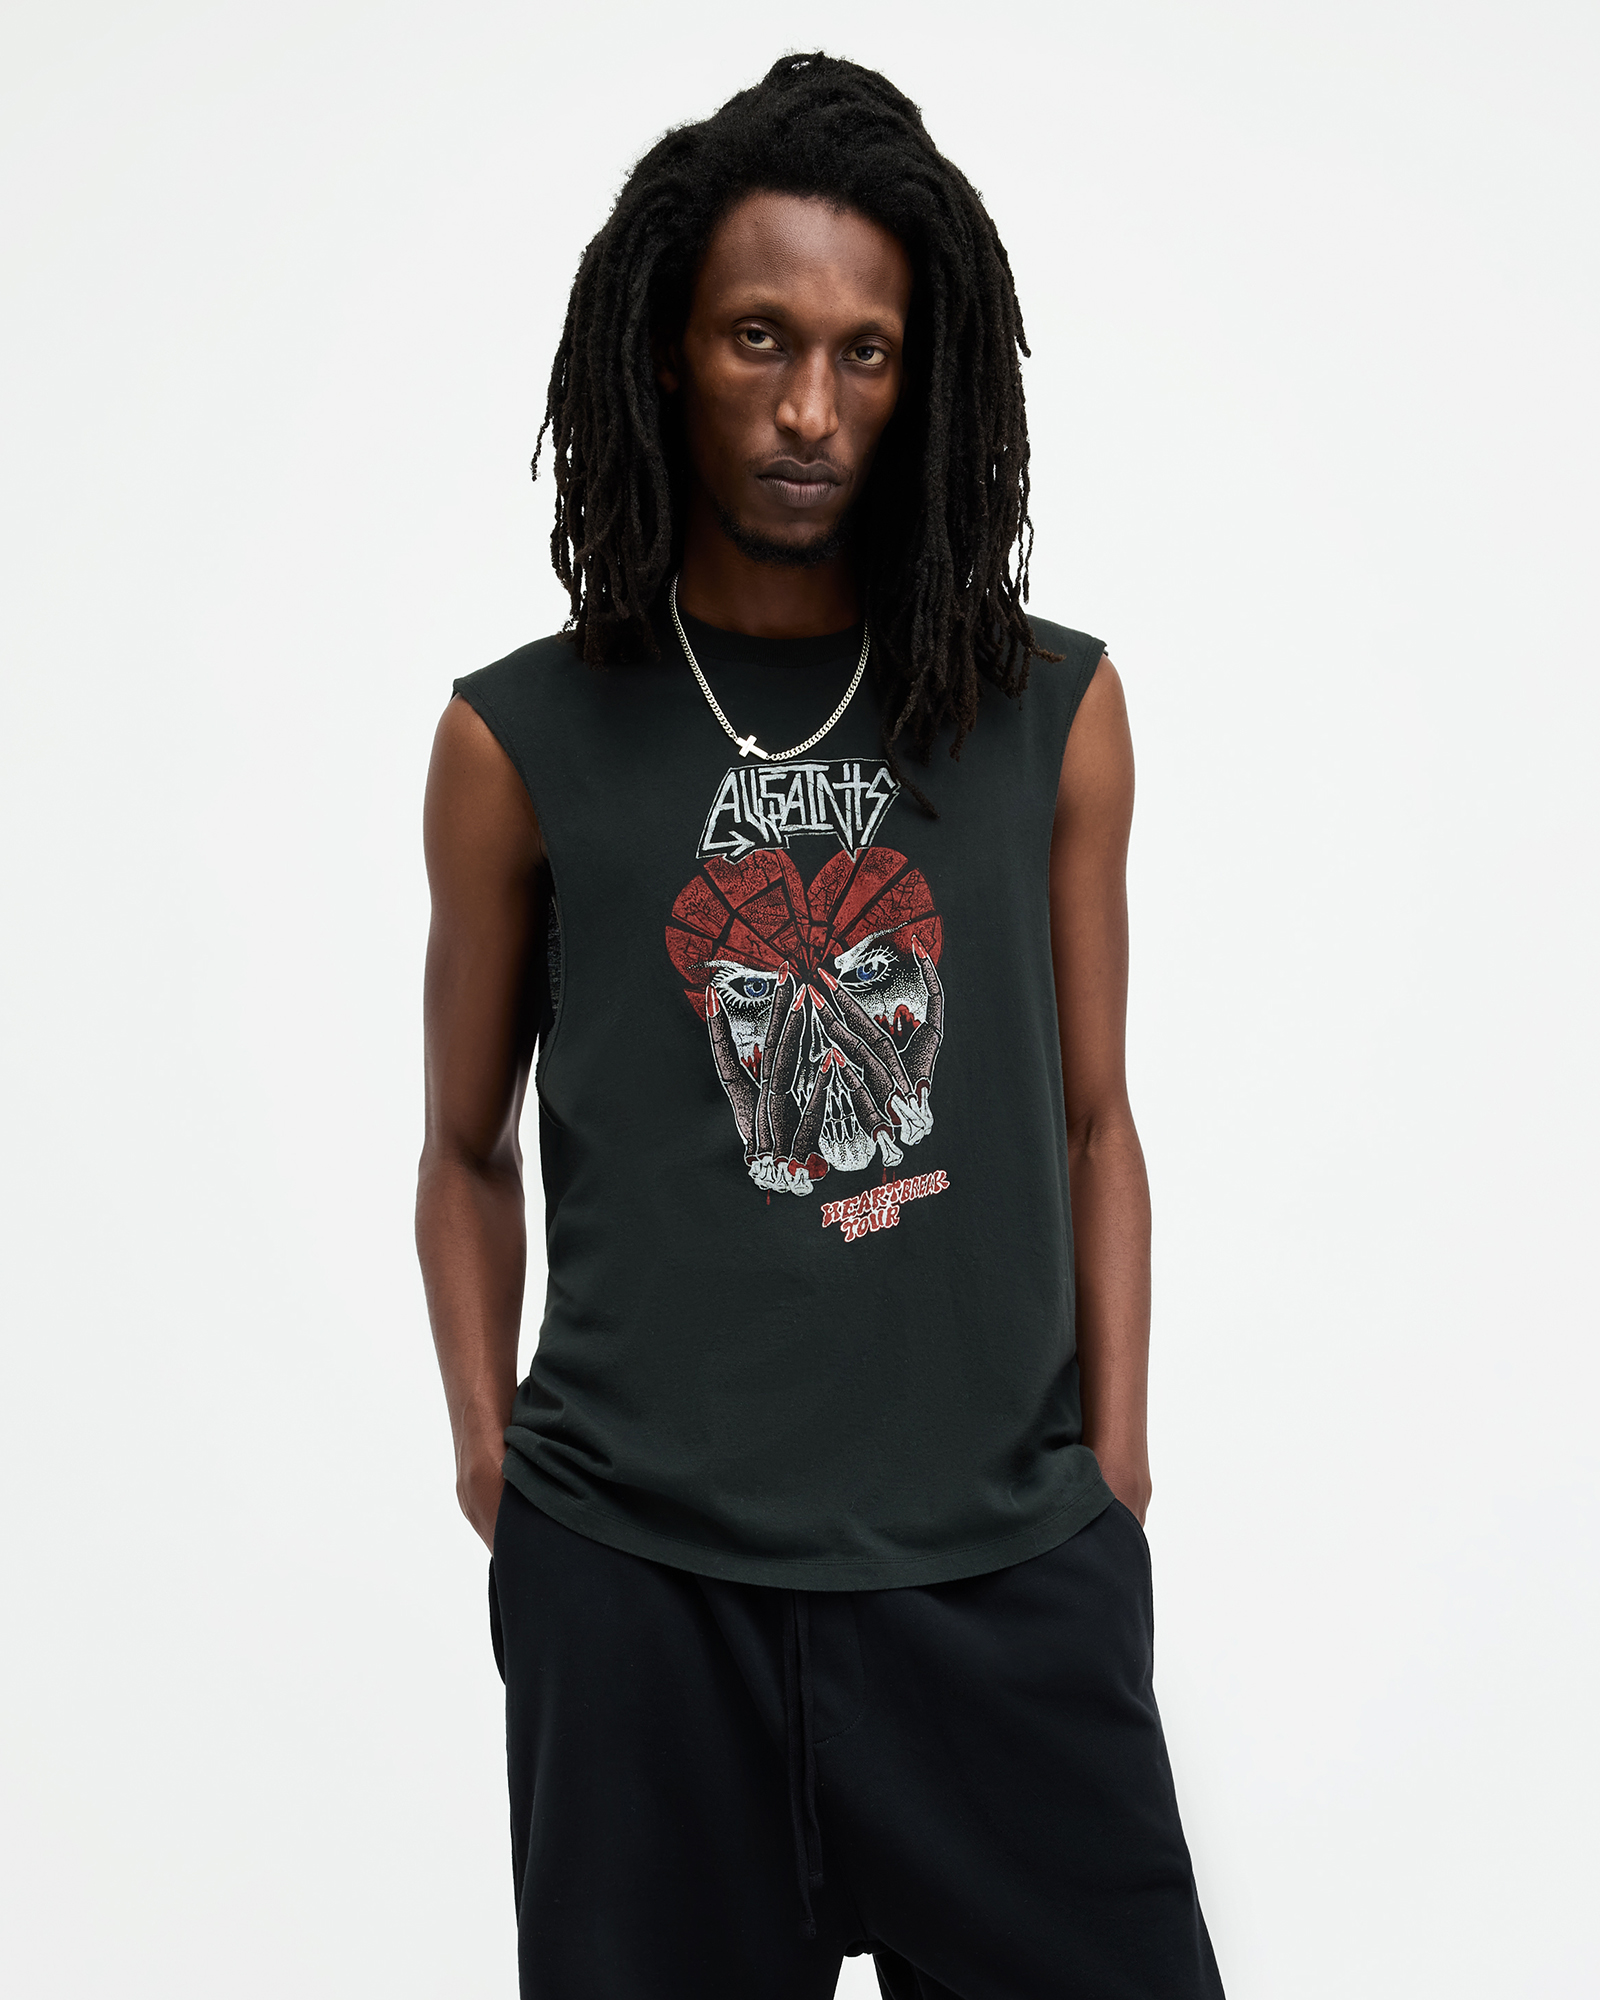 AllSaints Amortis Sleeveless Graphic Tank Top,, Washed Black